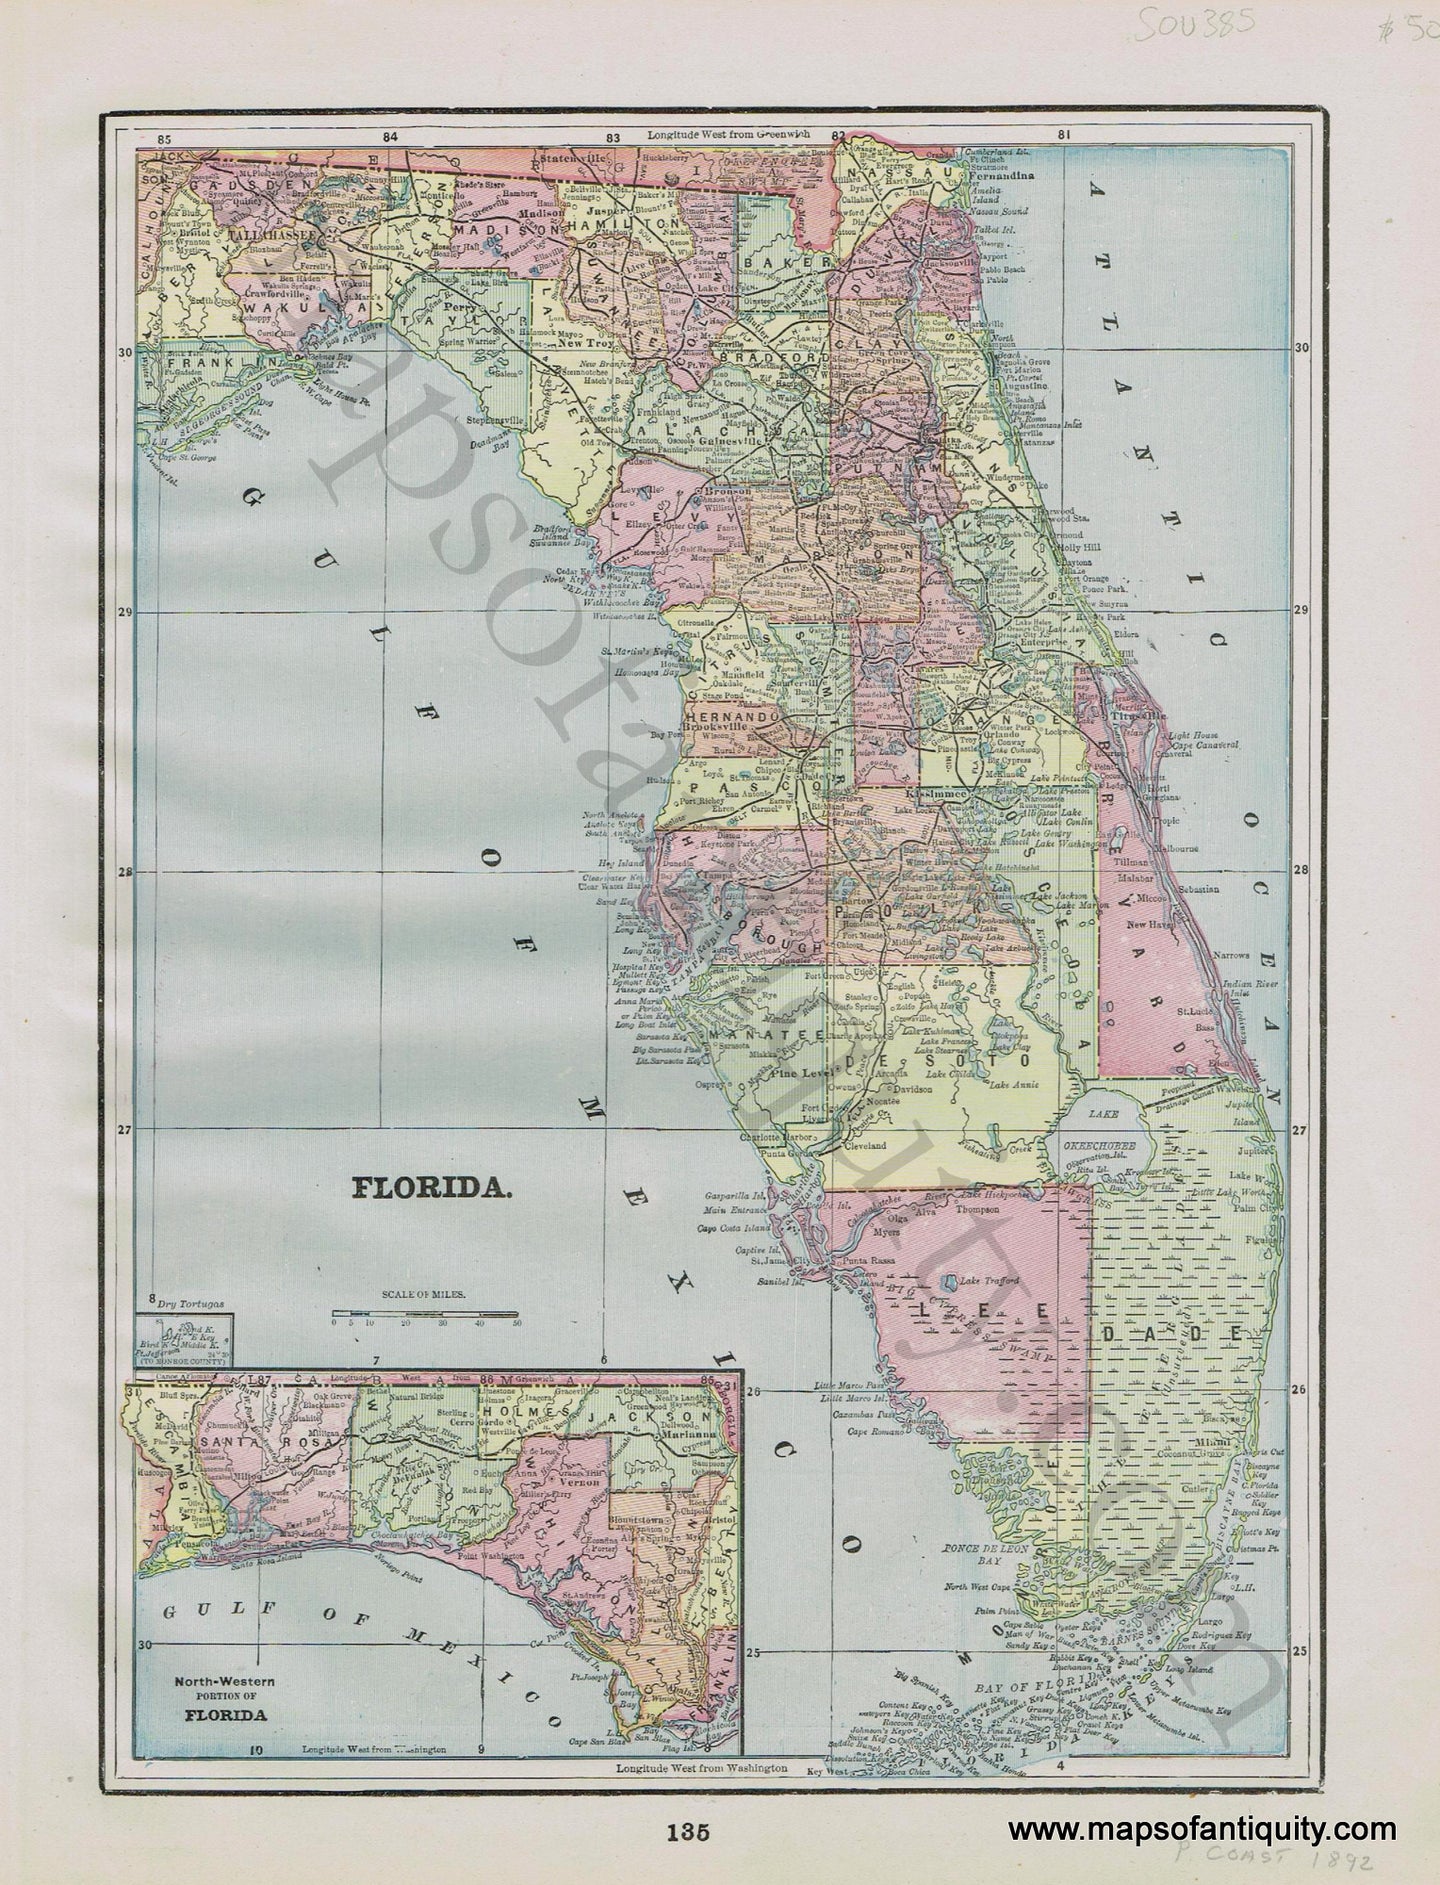 Antique-Map-State-United-States-U.S.-South-Florida-Alabama-Home-Library-and-Supply-Association-Pacific-Coast-1892-1890s-1800s-Late-19th-Century-Maps-of-Antiquity-